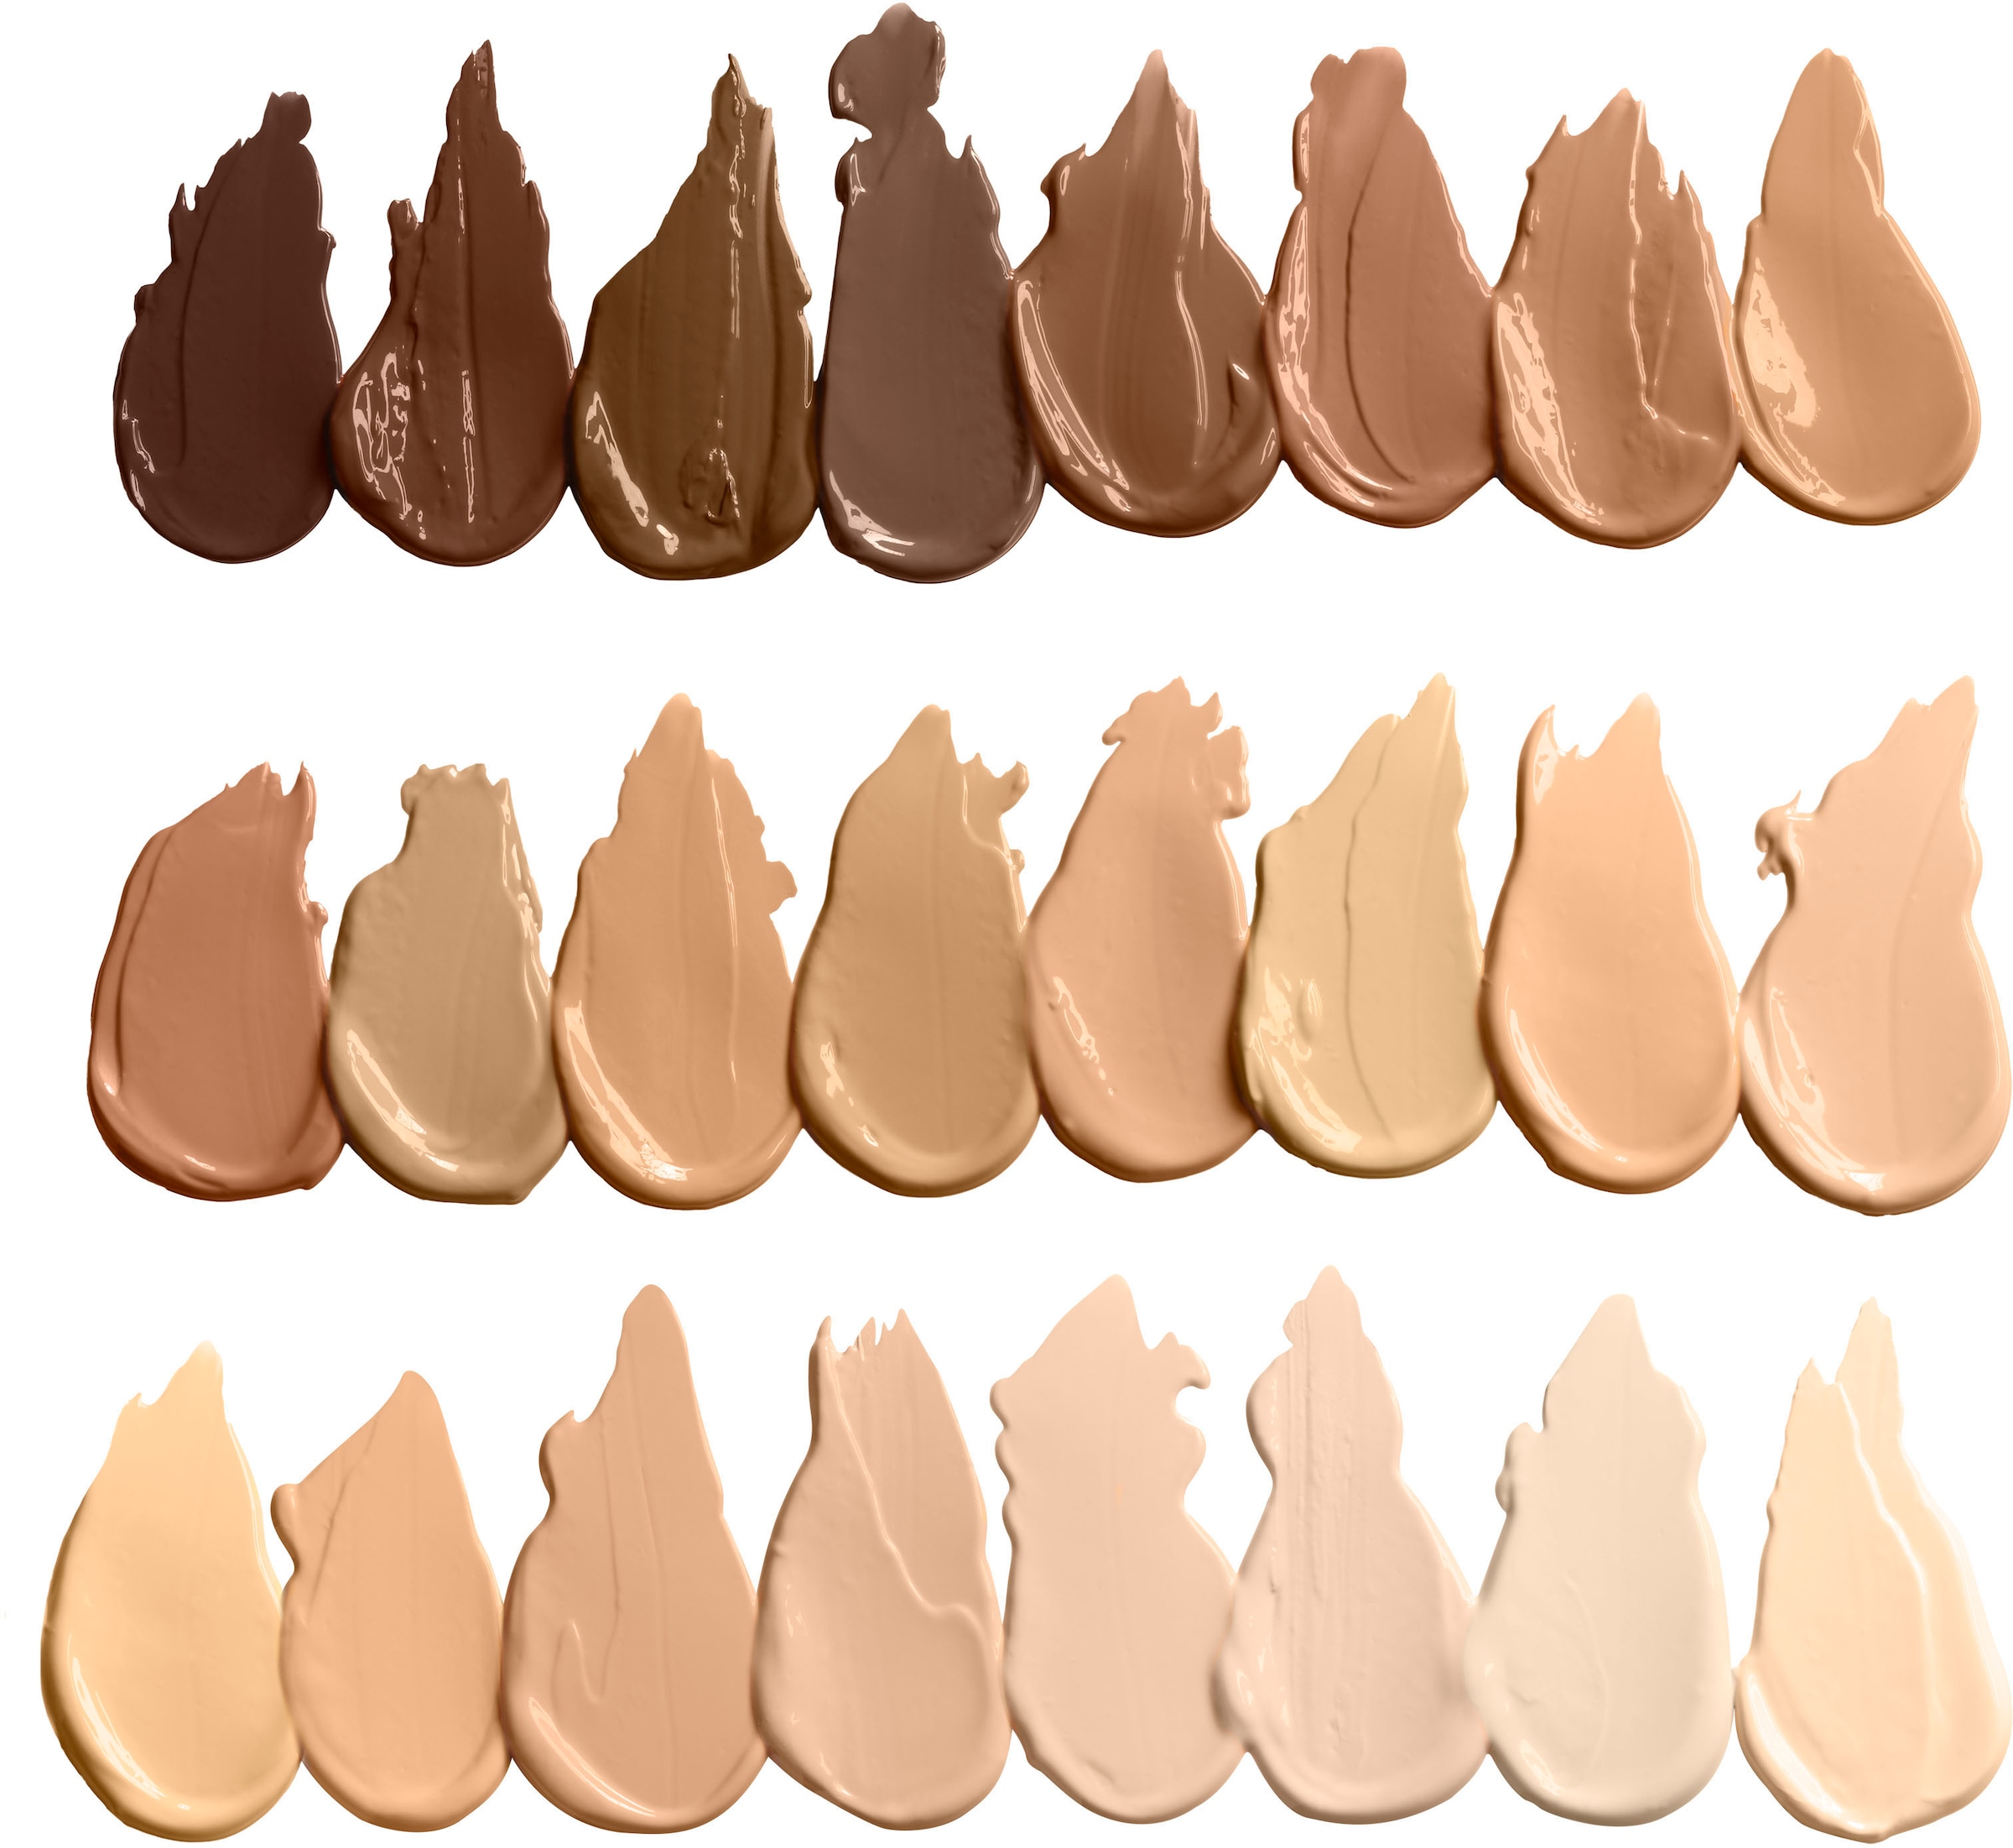 NYX Concealer »NYX Professional Makeup Can´t Stop Won´t Stop Concealer«  kaufen